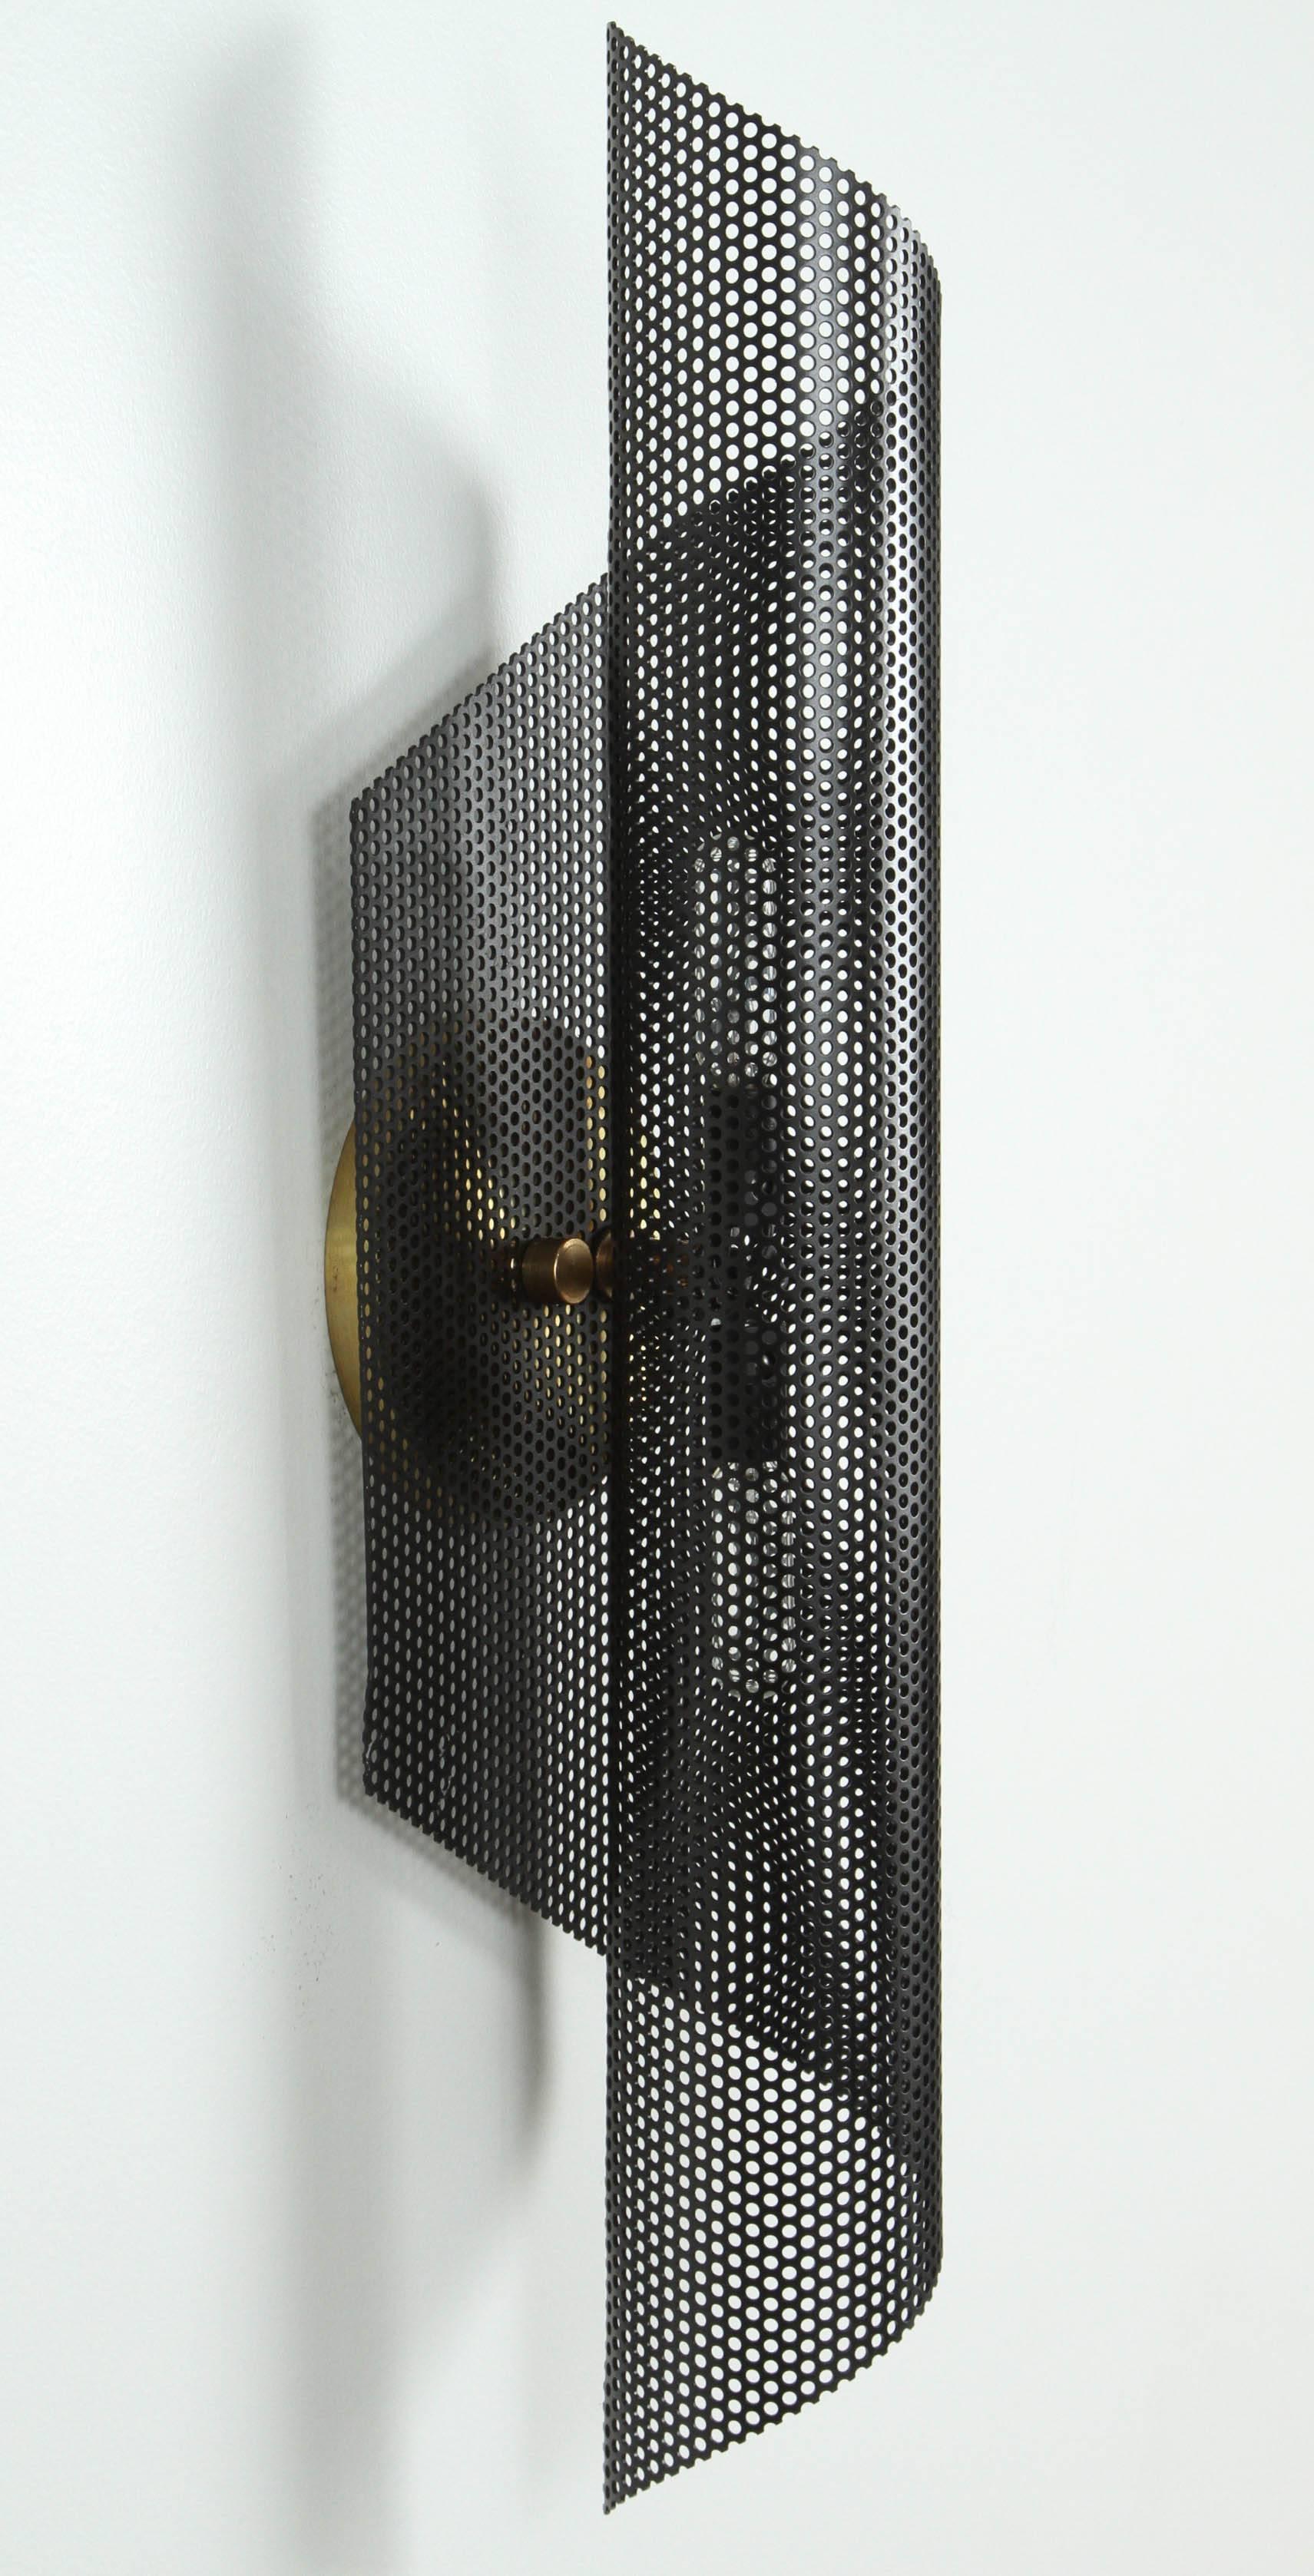 Rolled perforated sconce by Lawson-Fenning. In stock. Available to order in white or black with a 6-8 week lead time.